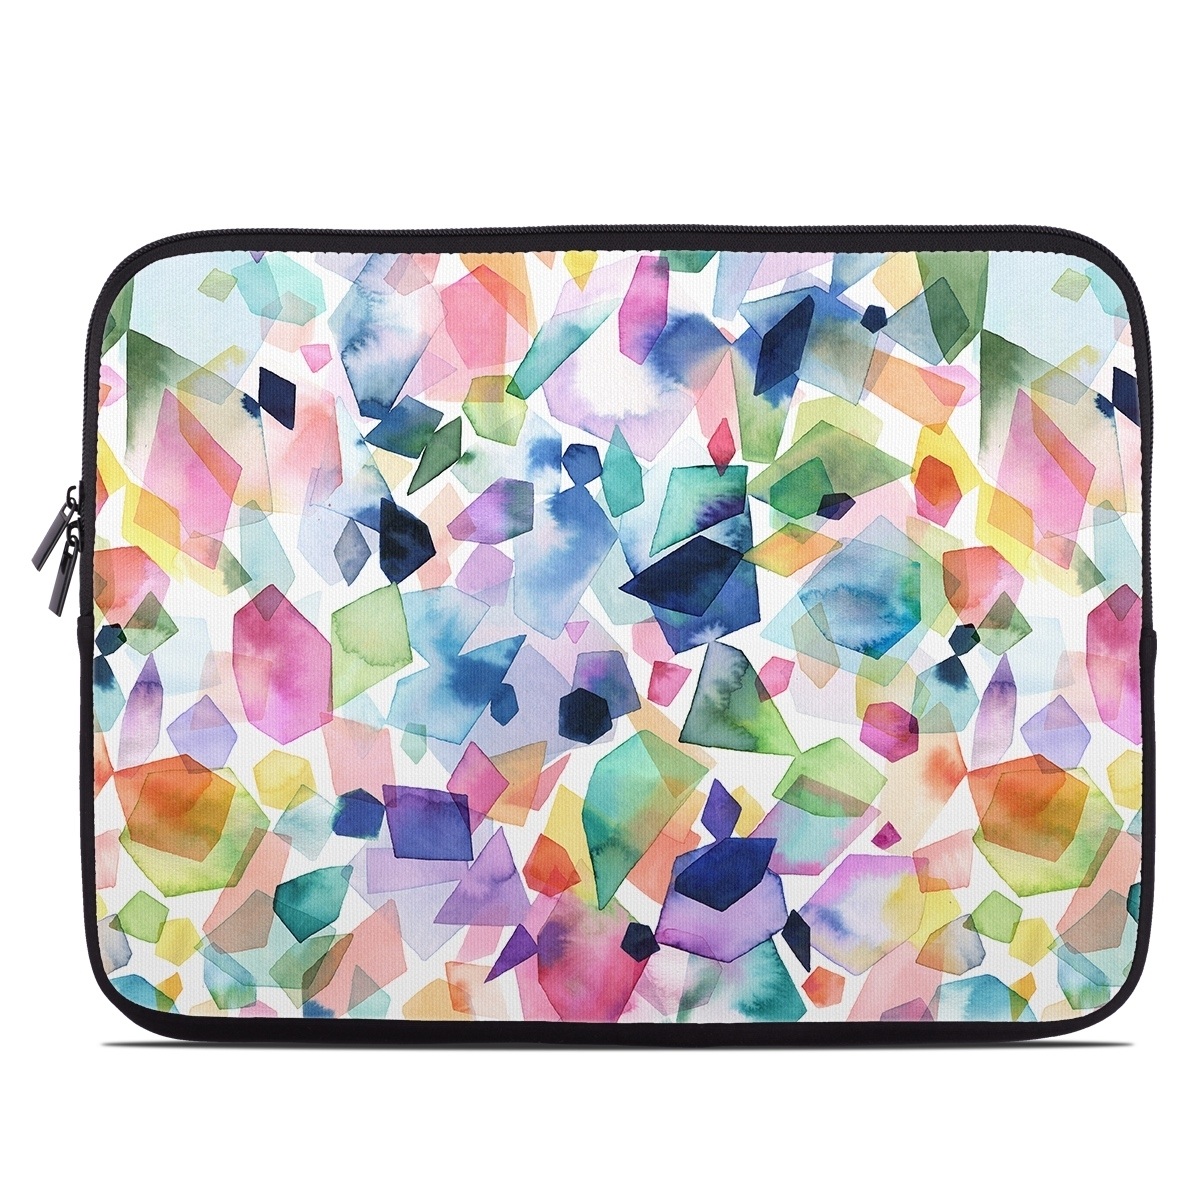 Laptop Sleeve - Watercolor Crystals and Gems (Image 1)